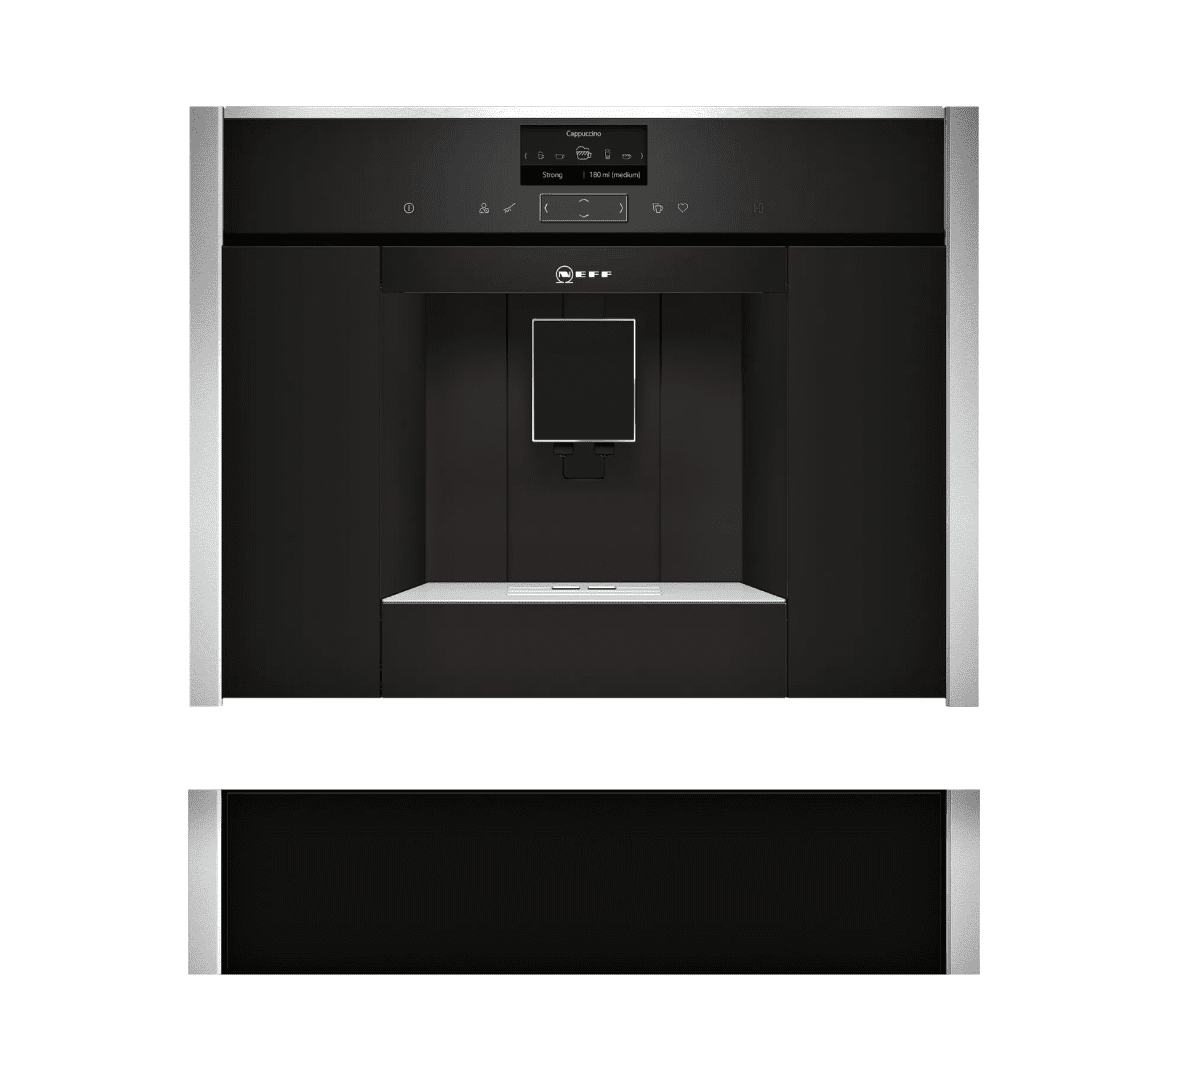 Built-In Coffee Machine & Accessory Drawer